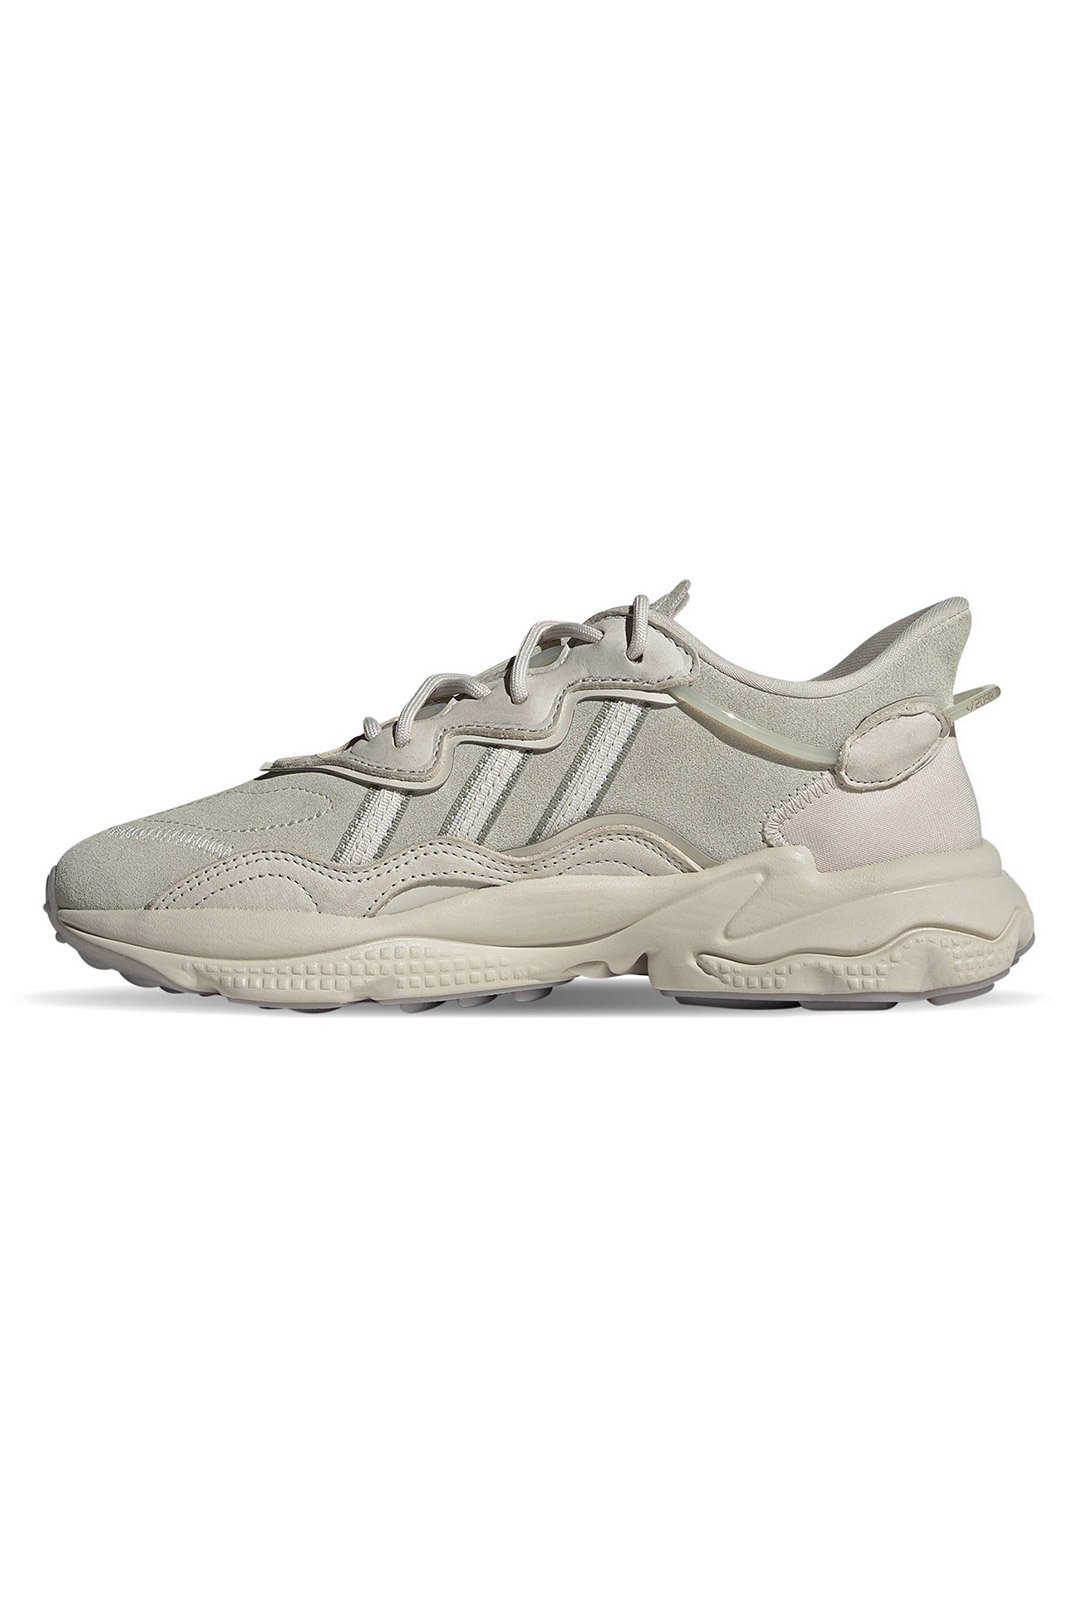 Baskets / Sneakers  Adidas GY6177 CLEAR BROWN/FEATHER GREY/WONDE